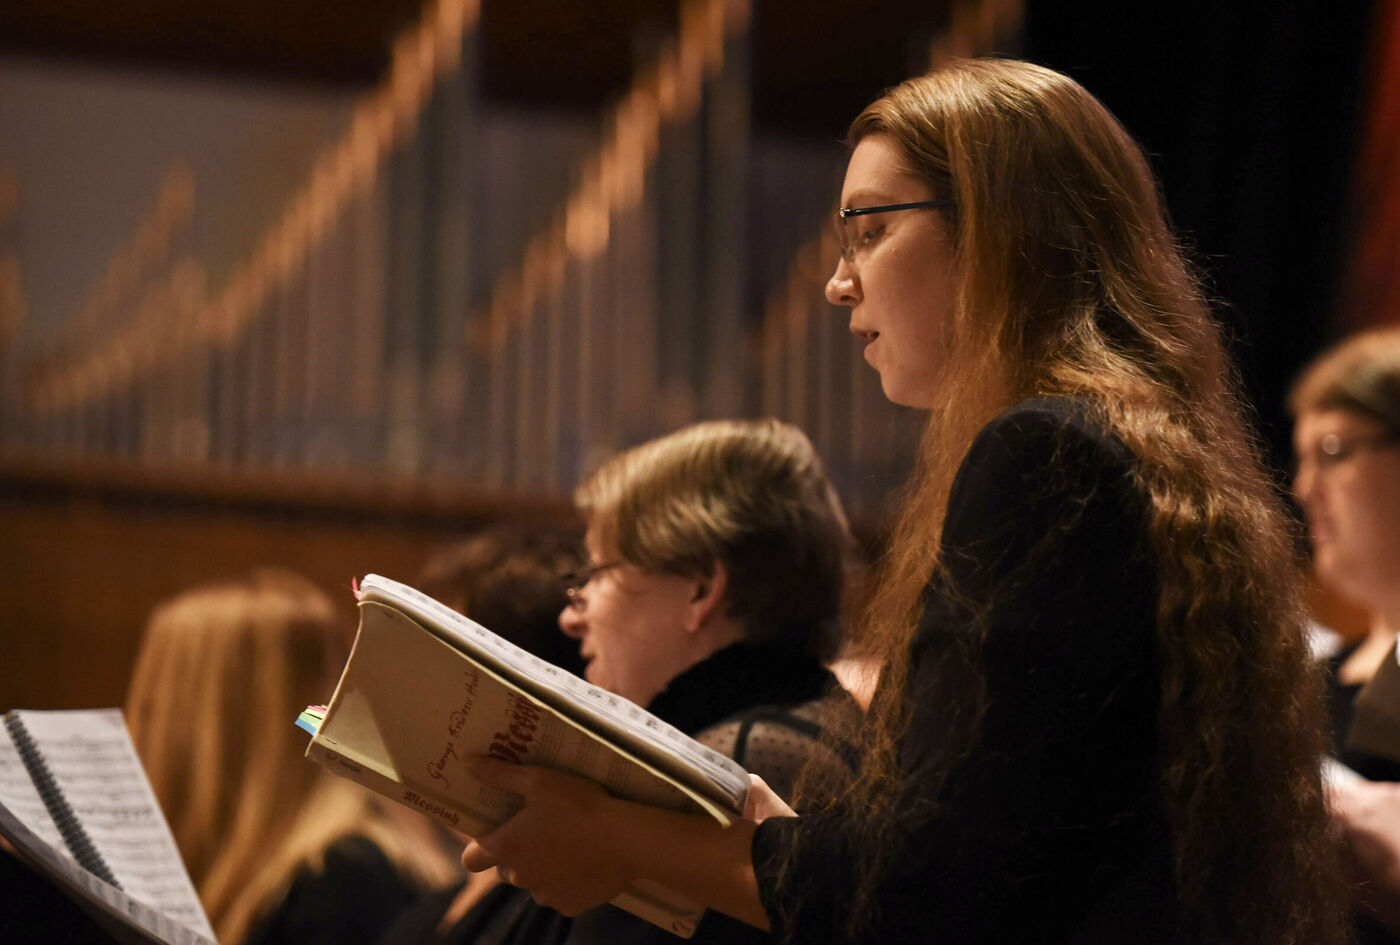 greenville-choral-union-and-orchestra-to-present-handels-messiah